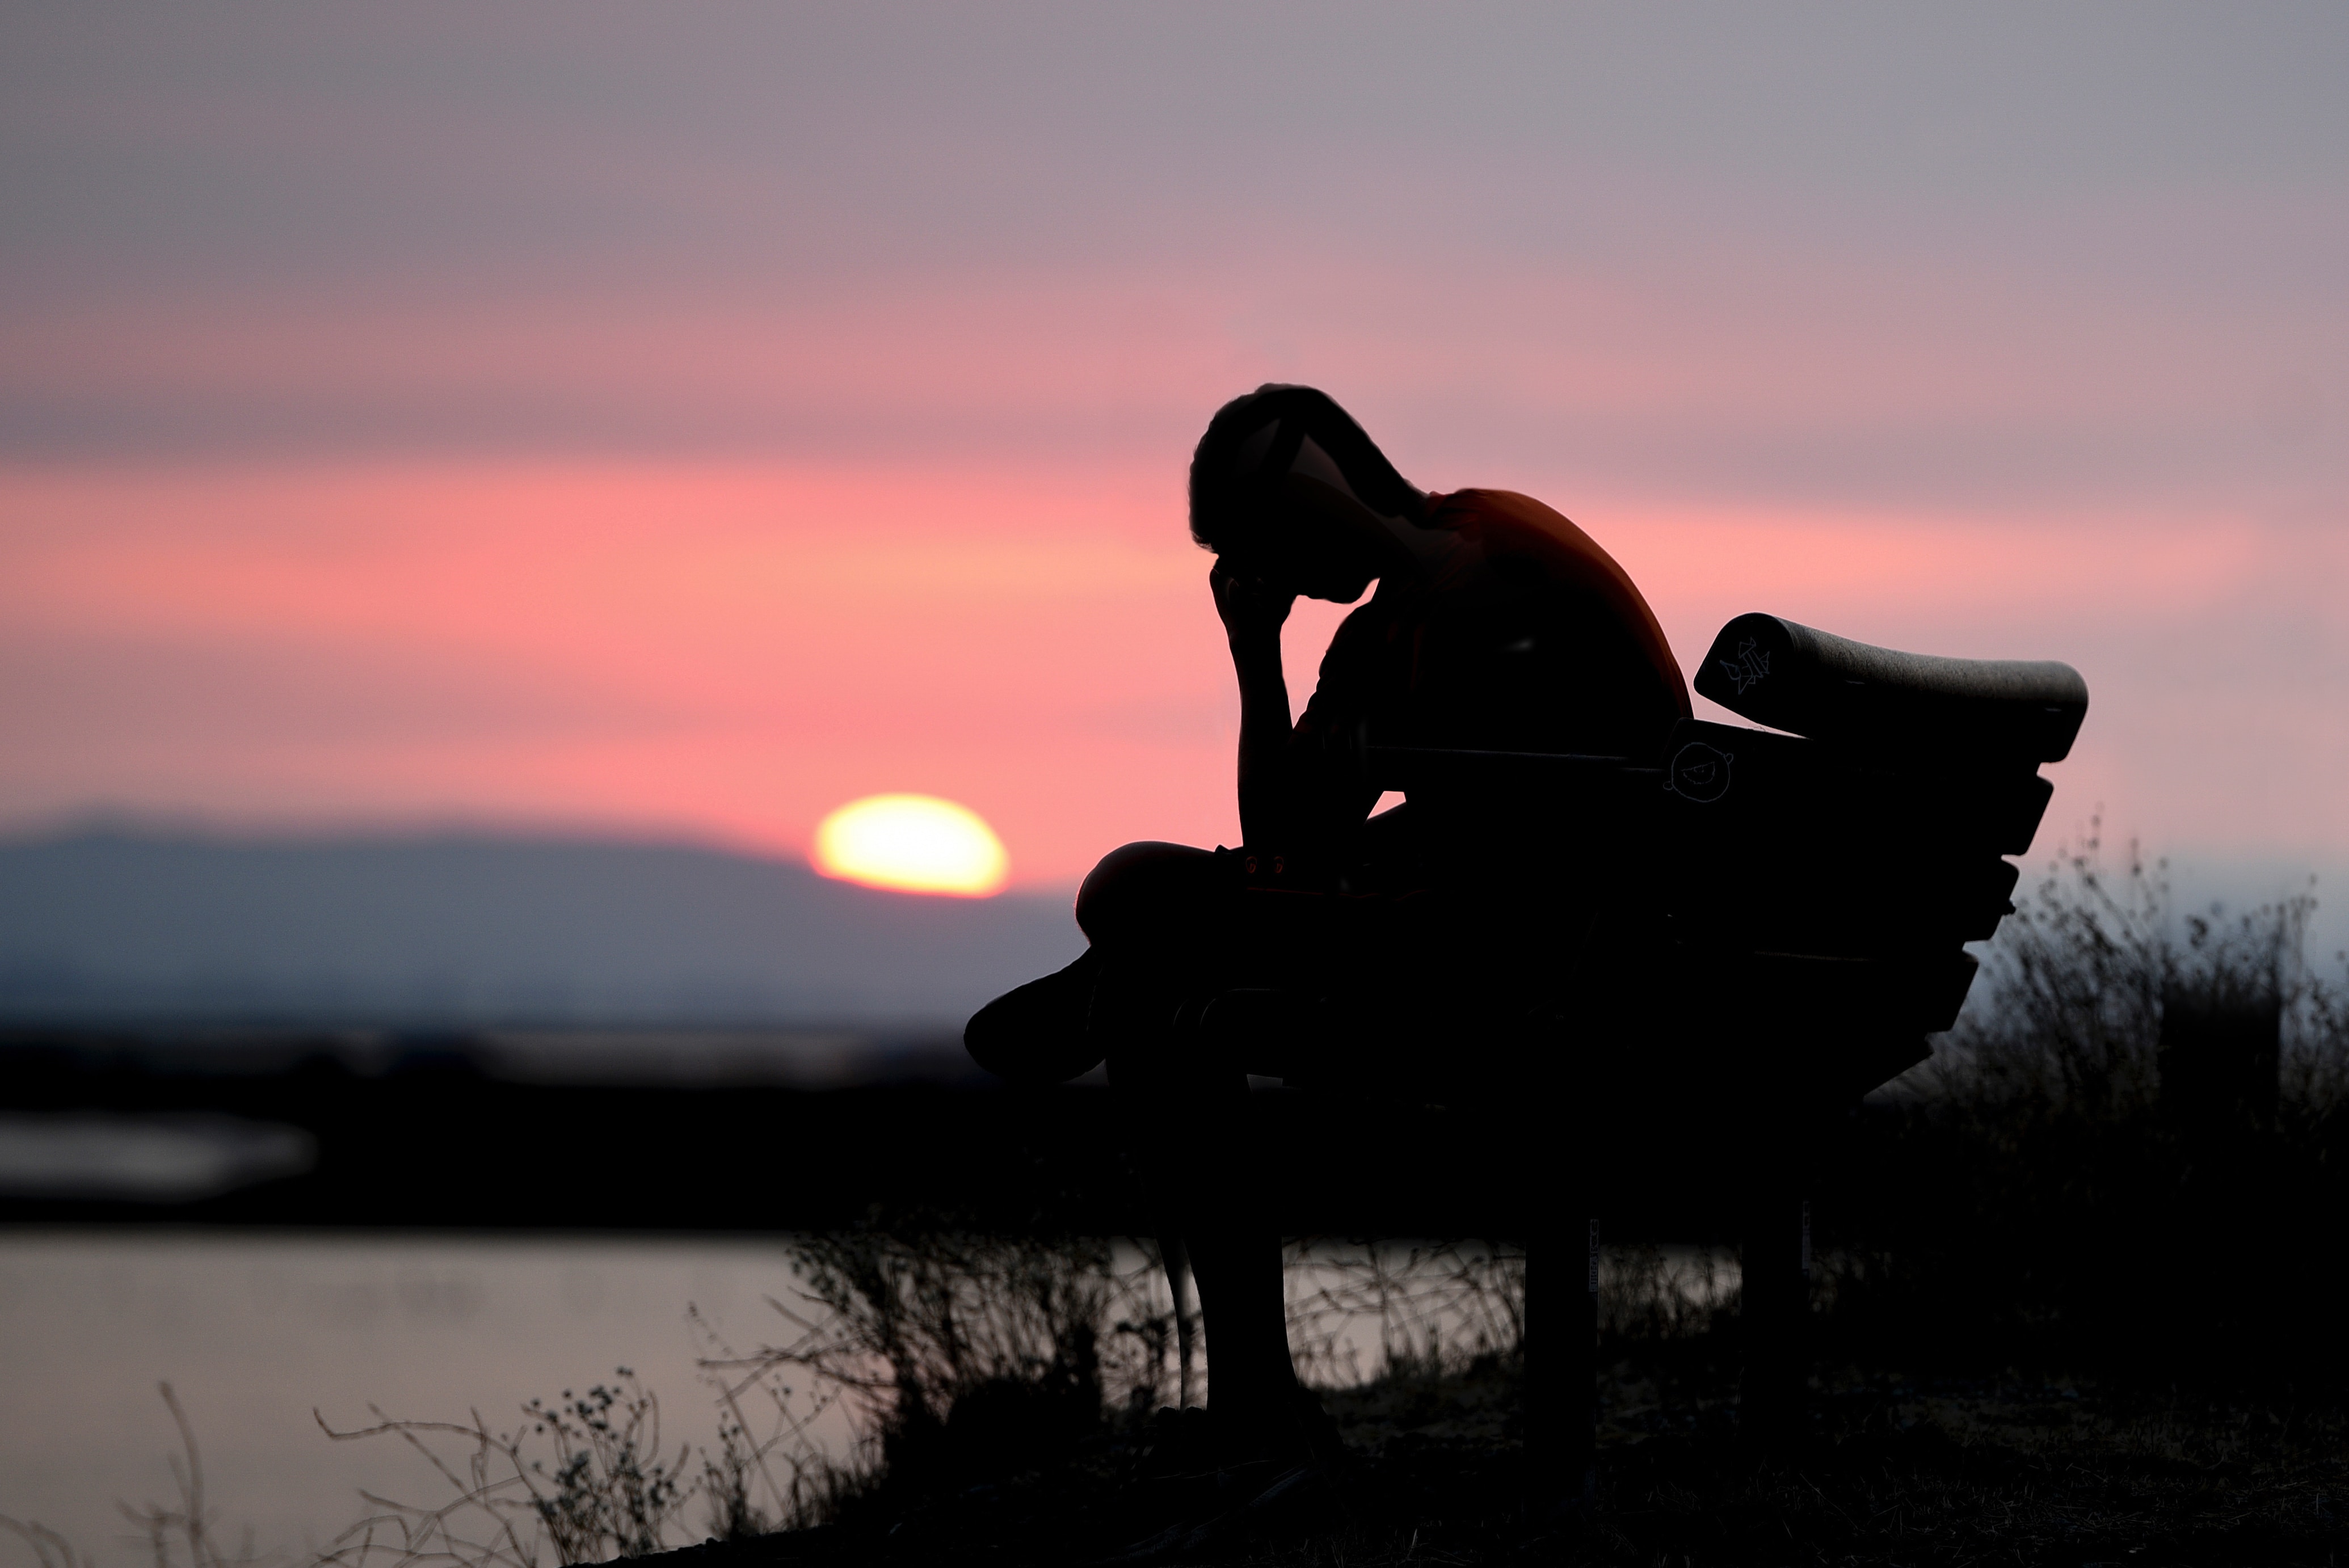 android sorrow, sadness, sunset, dark, silhouette, loneliness